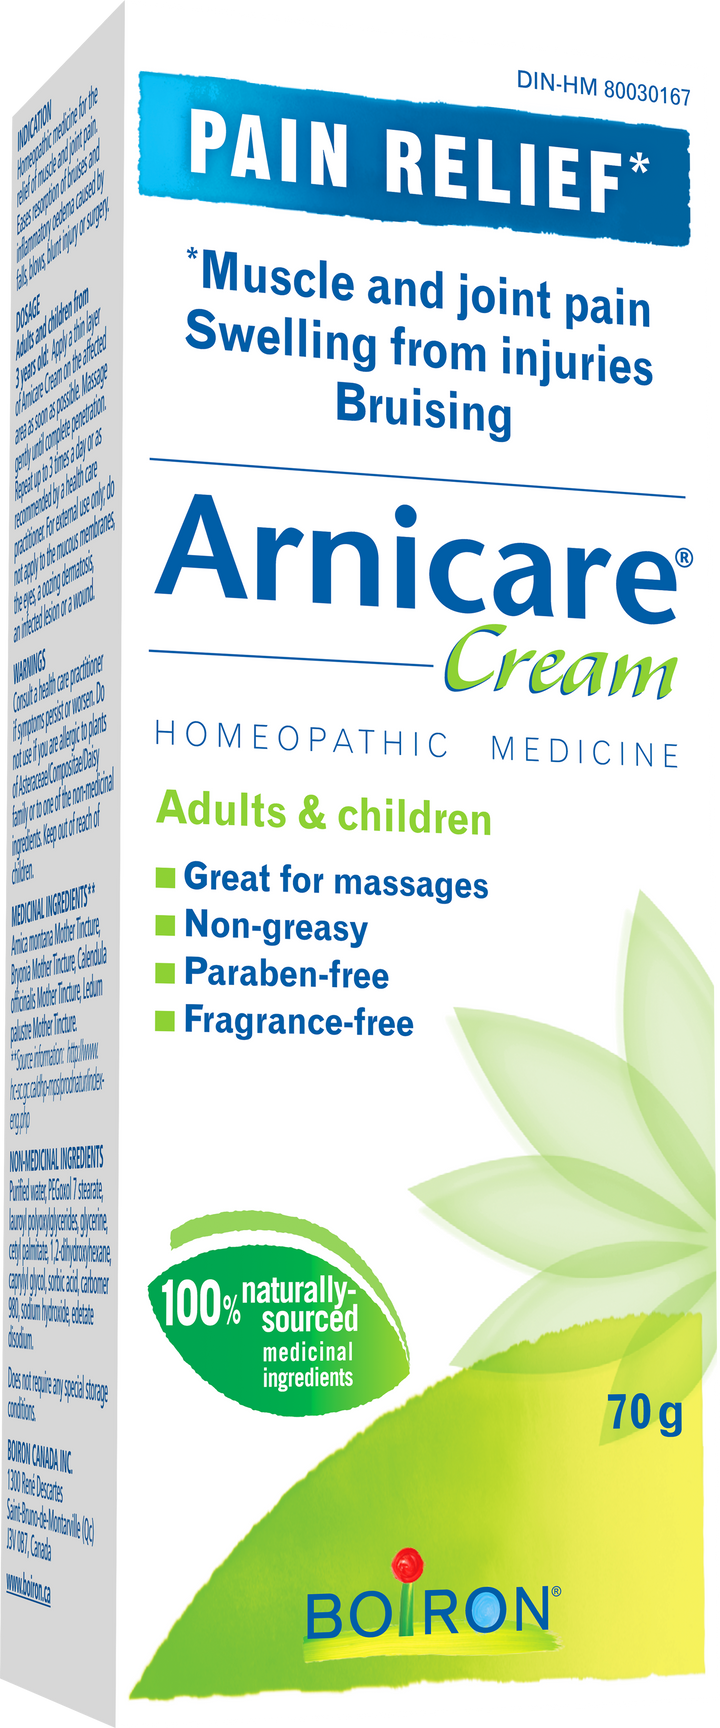 Boiron Arnicare Cream Muscle and Joint Pain